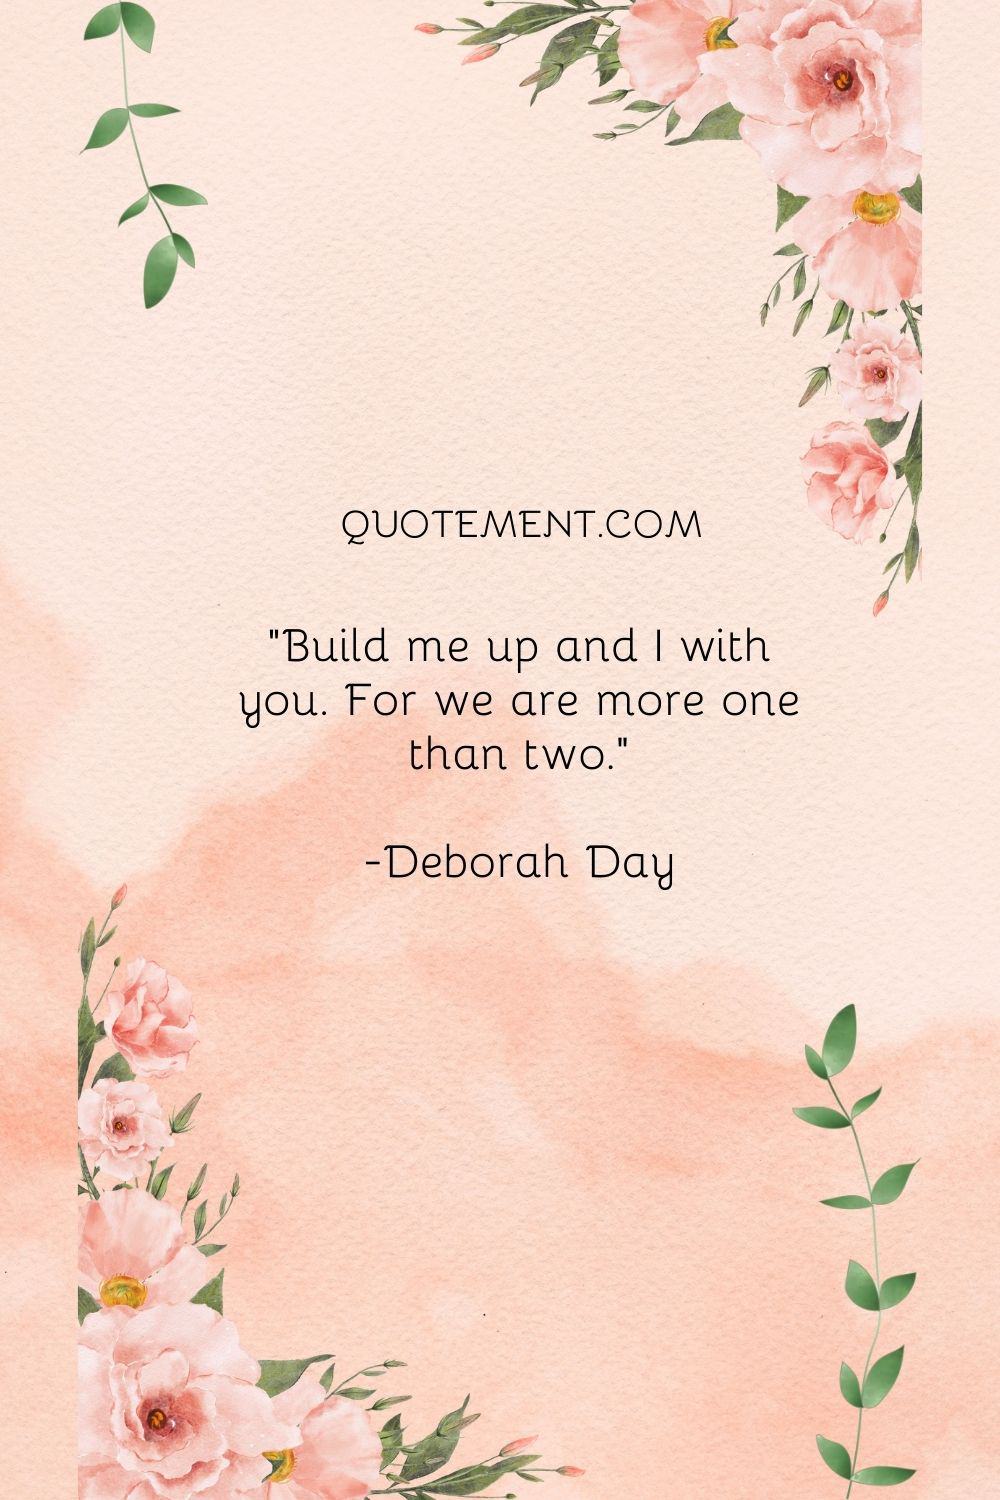 Build me up and I with you. For we are more one than two.